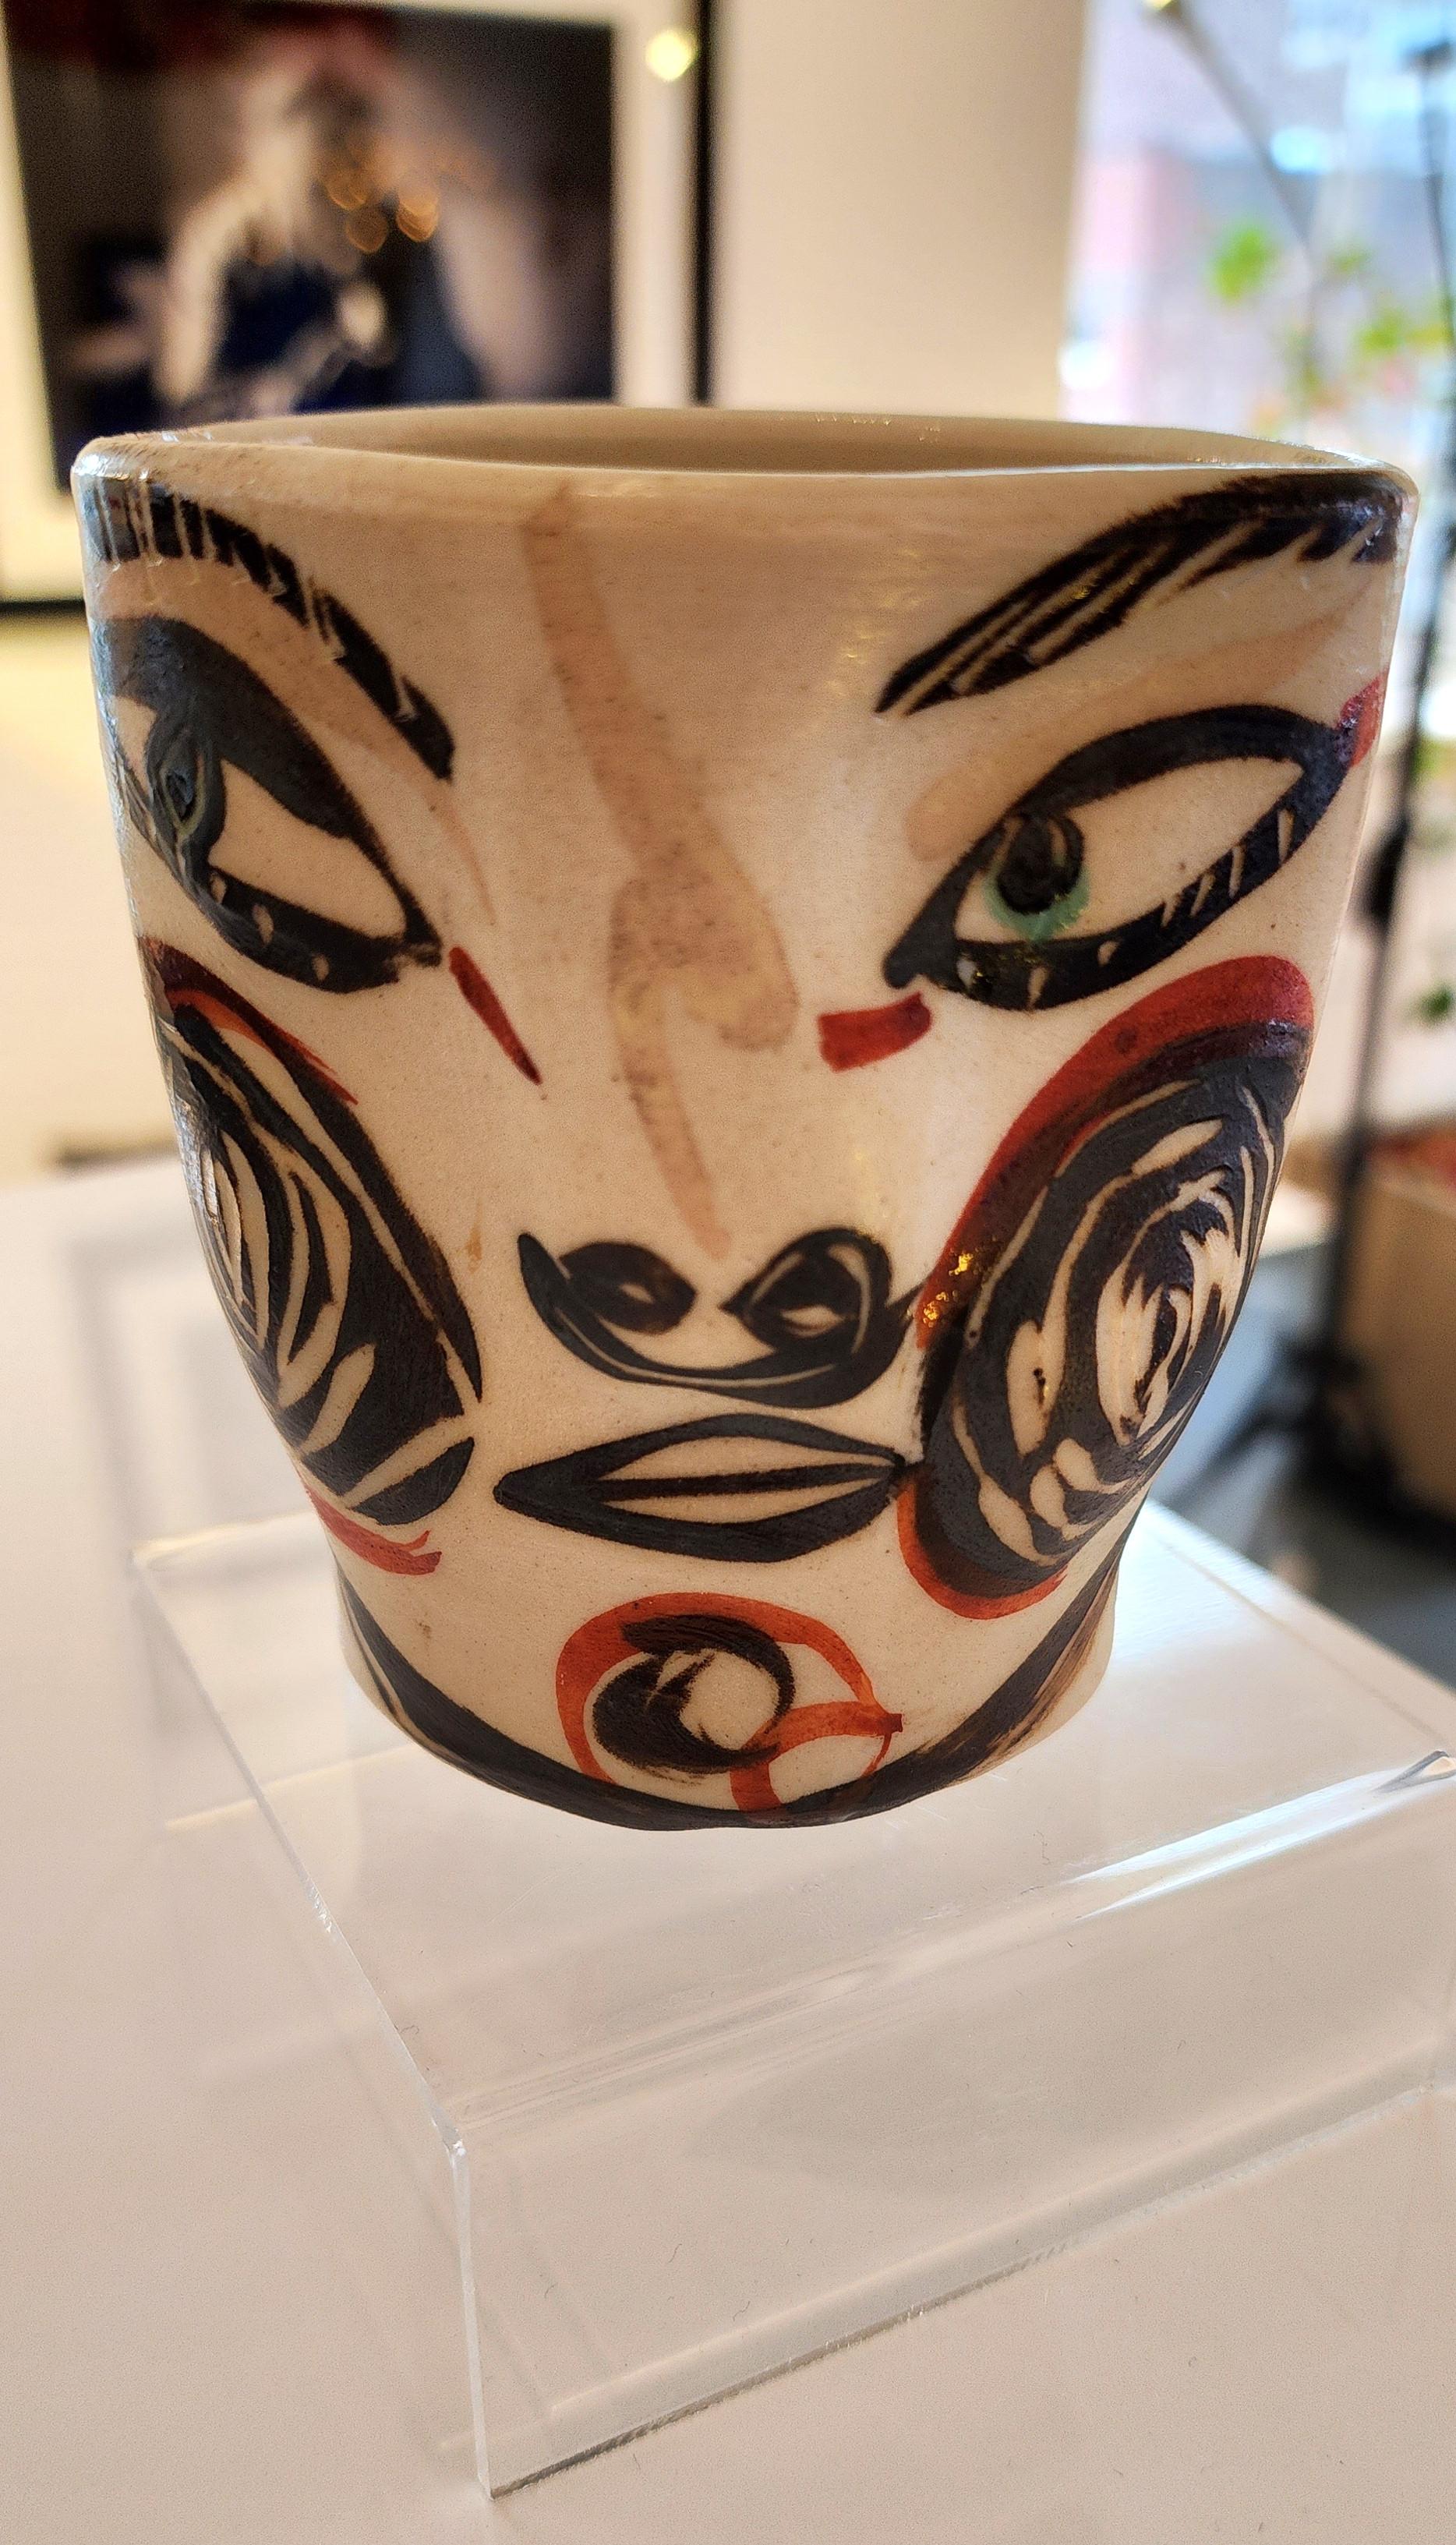 Cup with Face (Modern Ceramics) - Sculpture by Akio Takamori